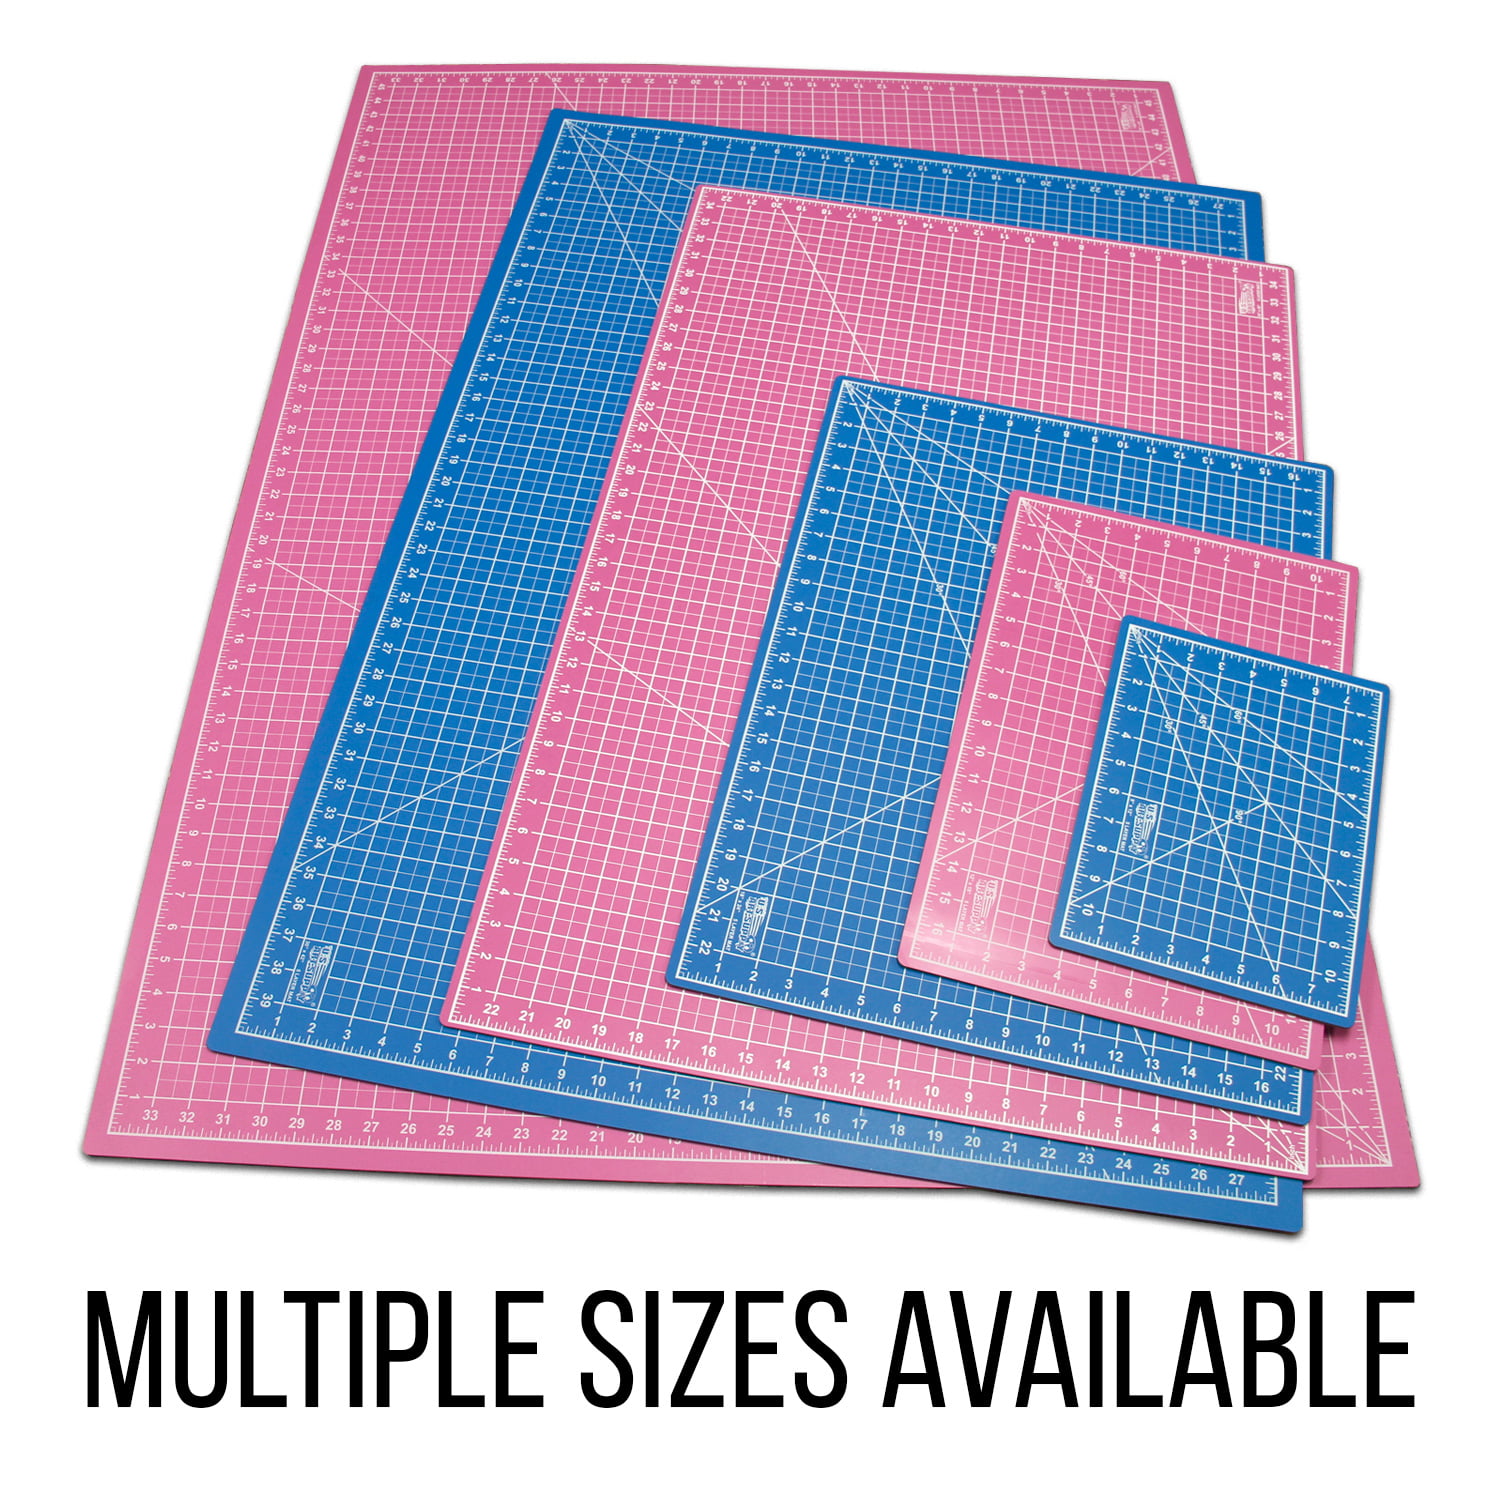  TOOCUST Cutting Mat 9X12inch,Double Sided 5 Layers